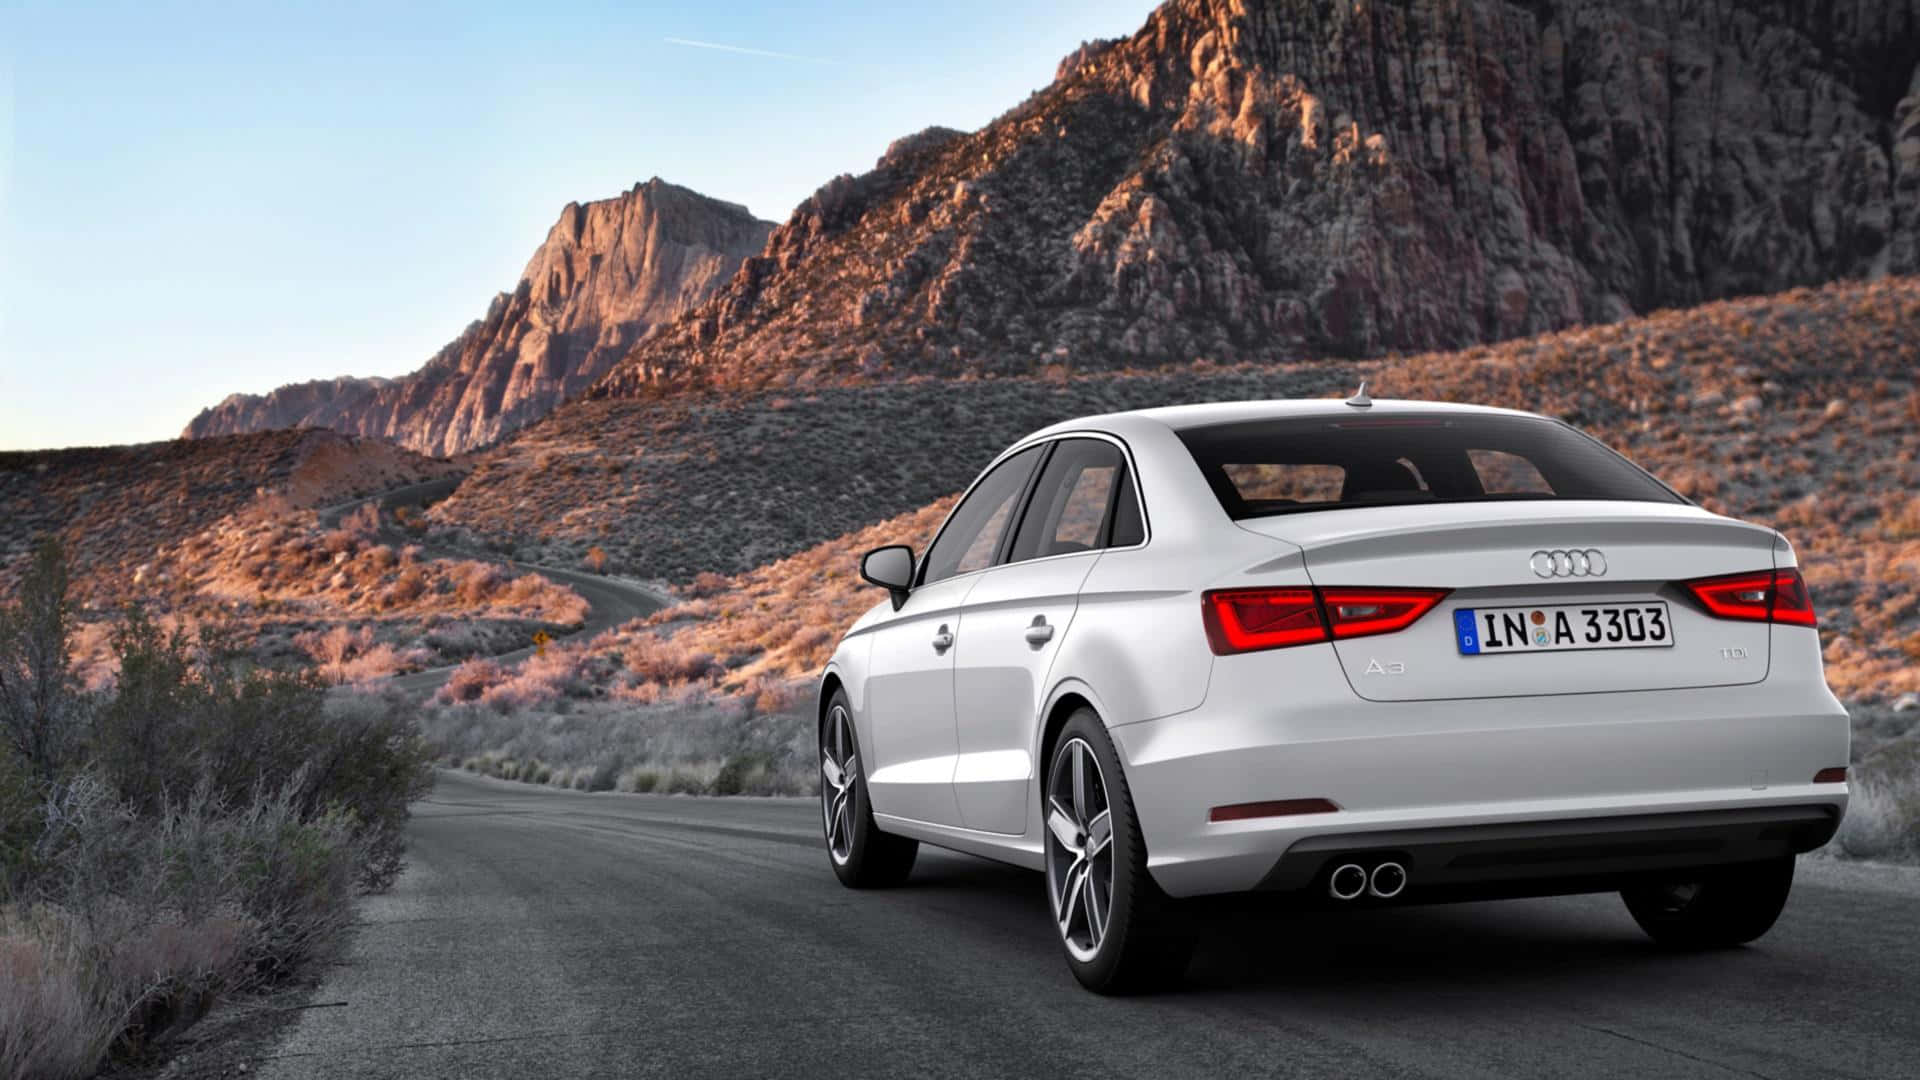 Sleek and Stylish Audi A3 in the City Wallpaper